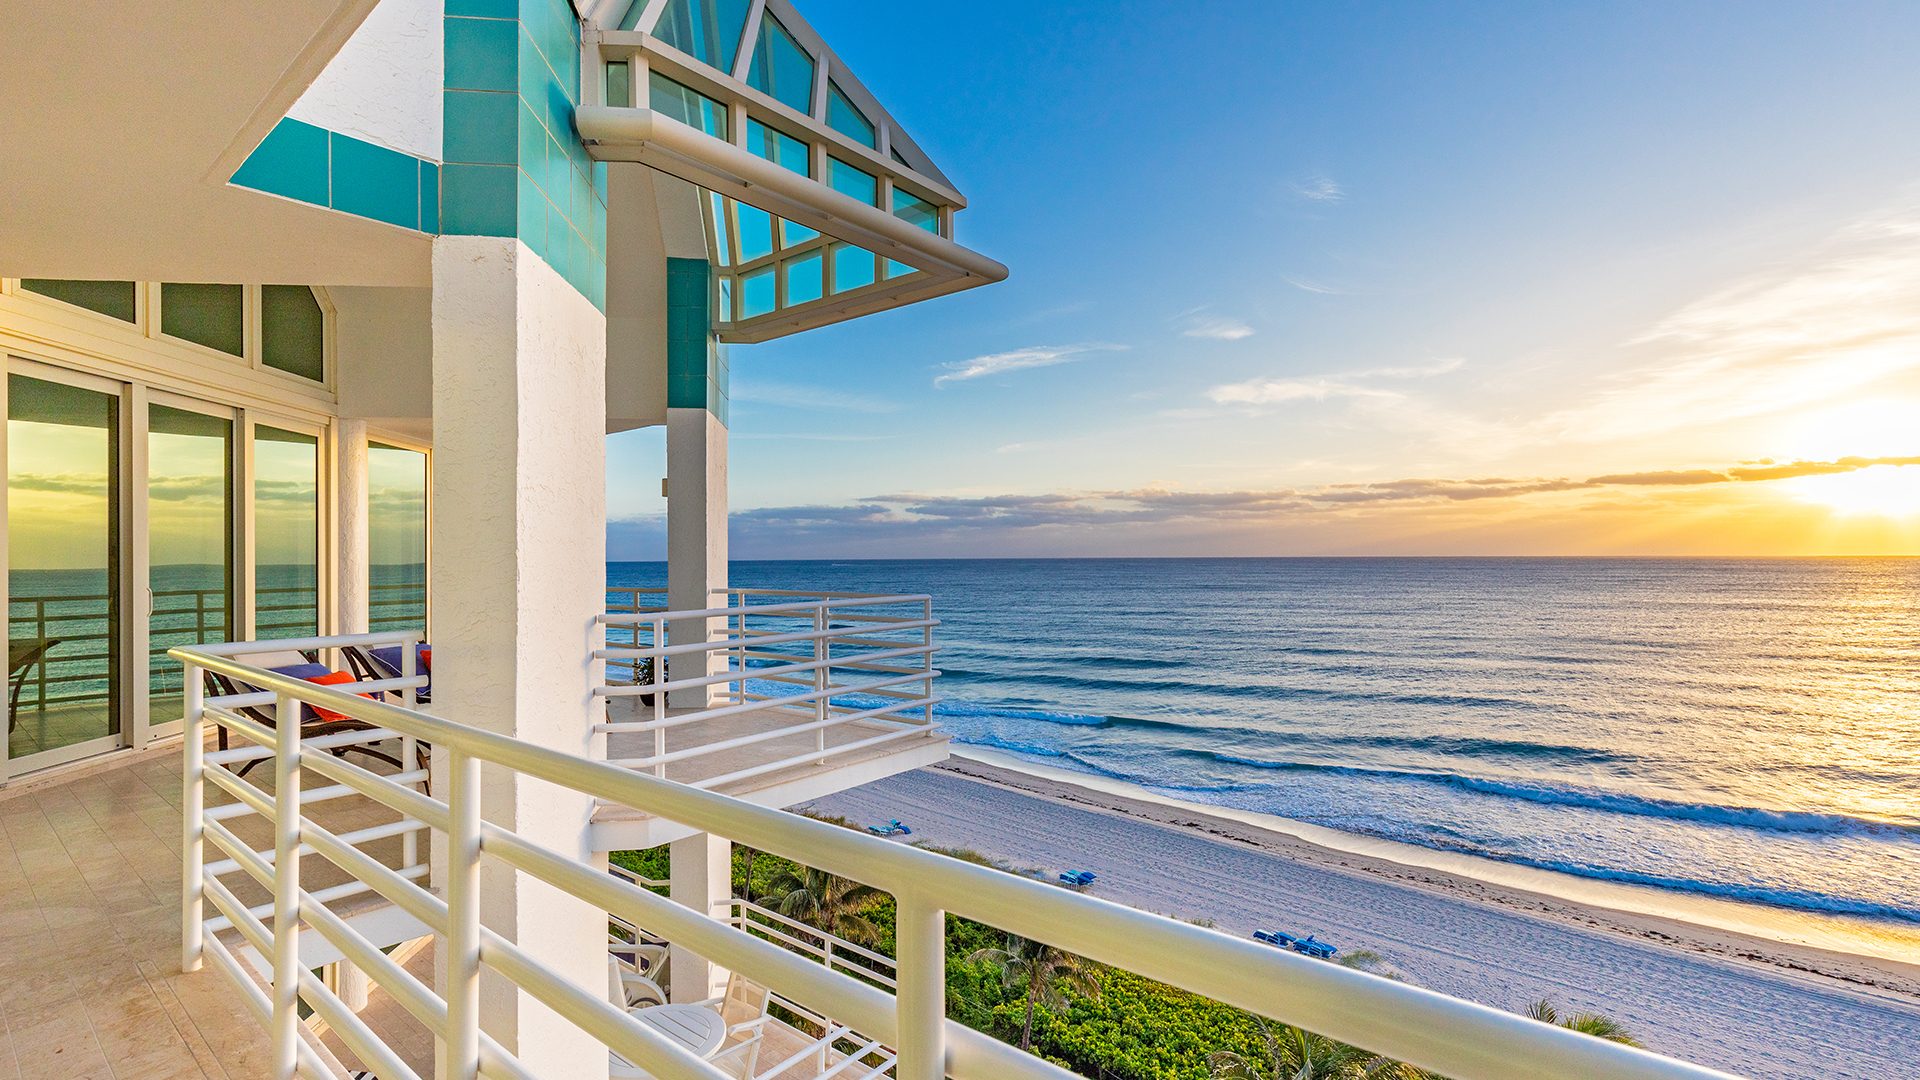 Penthouse 6 For Sale at Presidential Place, Boca Raton Florida 33432